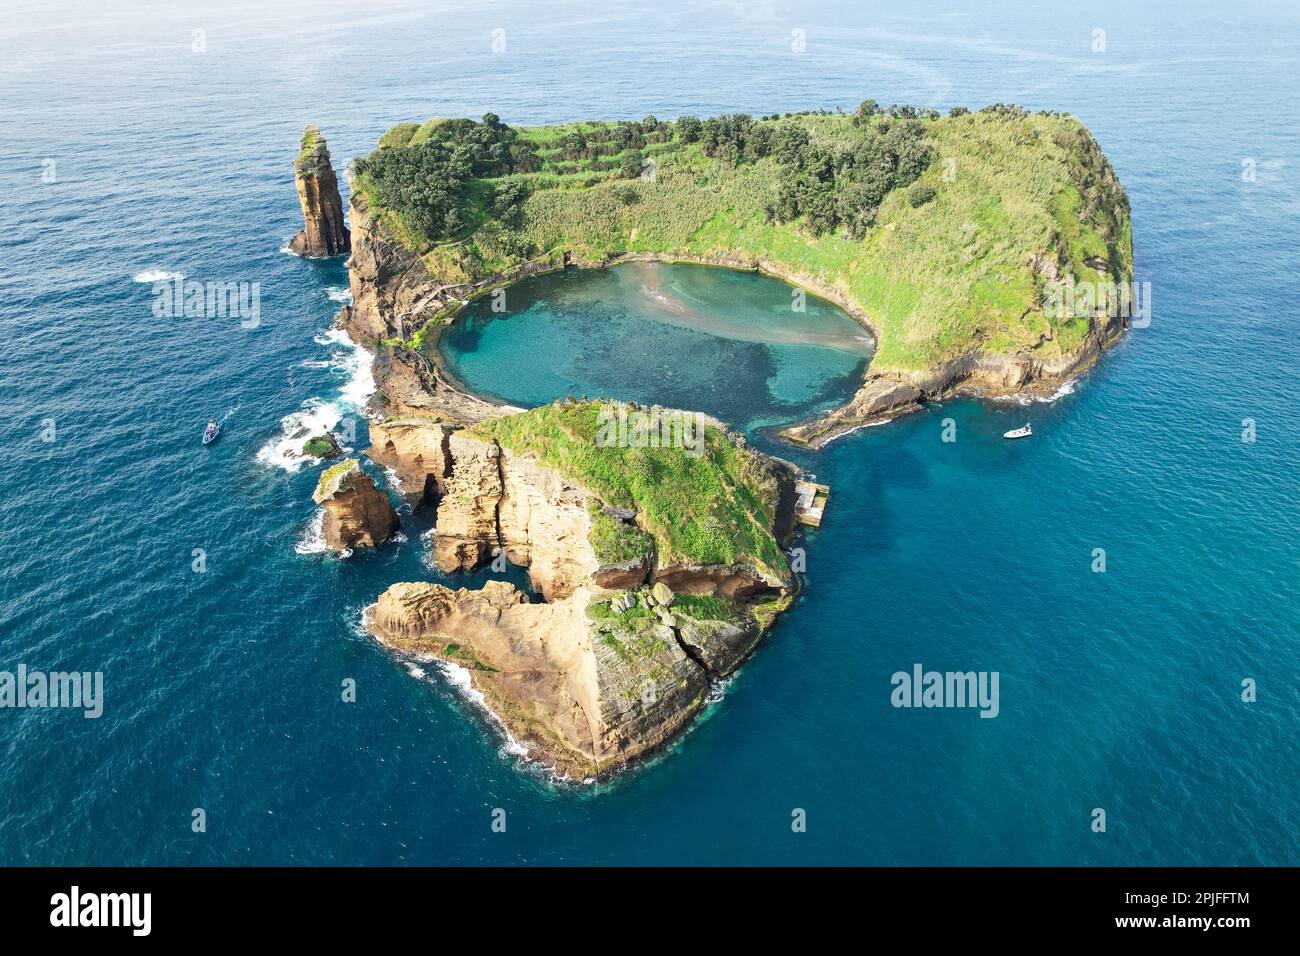 Vila Franca Islet, also known as the Princess Ring is a vegetated uninhabited islet located off the south central coast of the island of Sao Miguel in Stock Photo